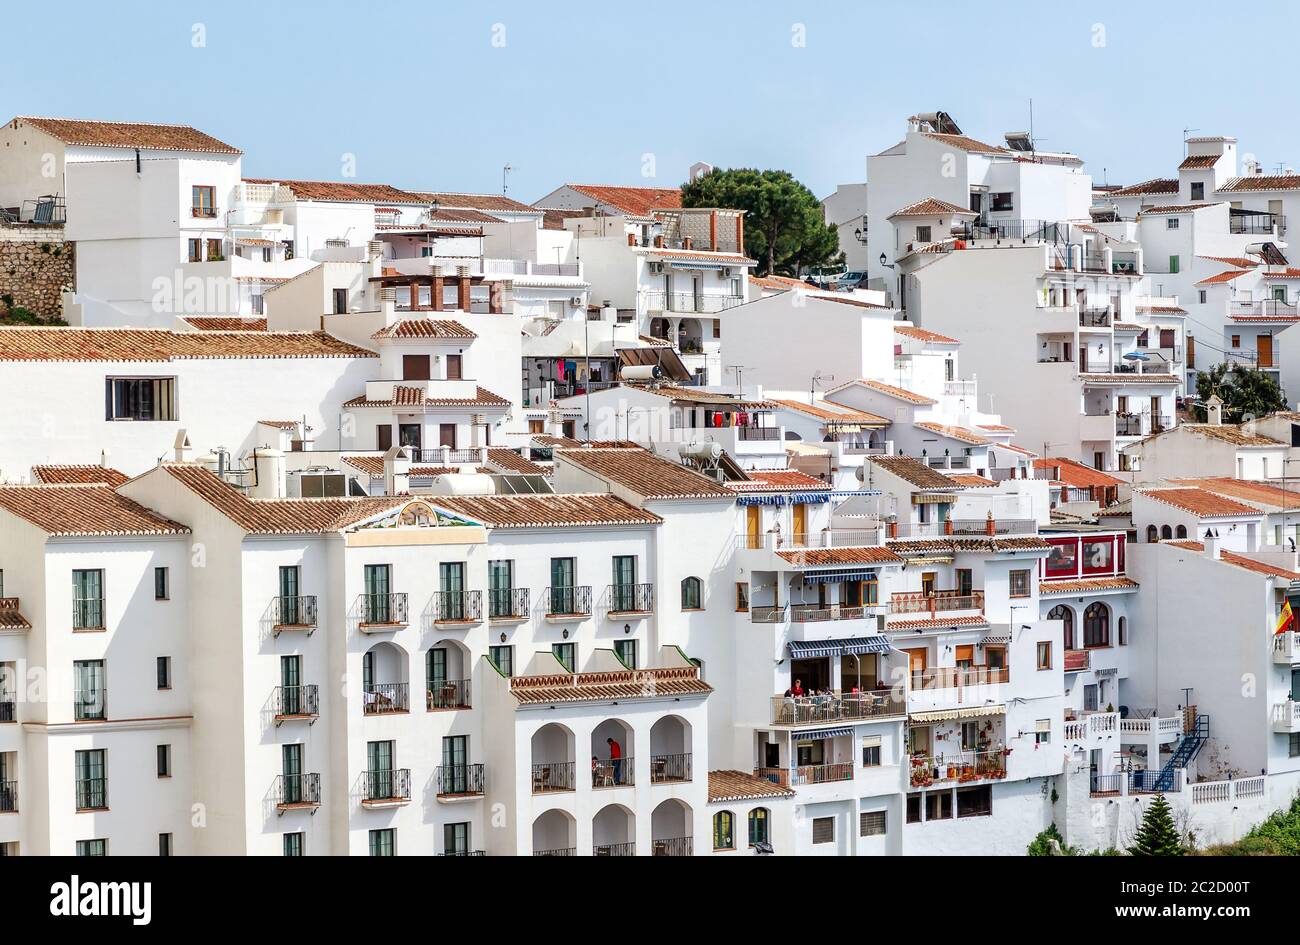 The White Mountain village of Frigiliana close to popular town of Nerja. Frigiliana is a beautiful typical Andalusian town that still keeps its Moorish structure. Province Malaga, Costa del Sol, Spain Stock Photo